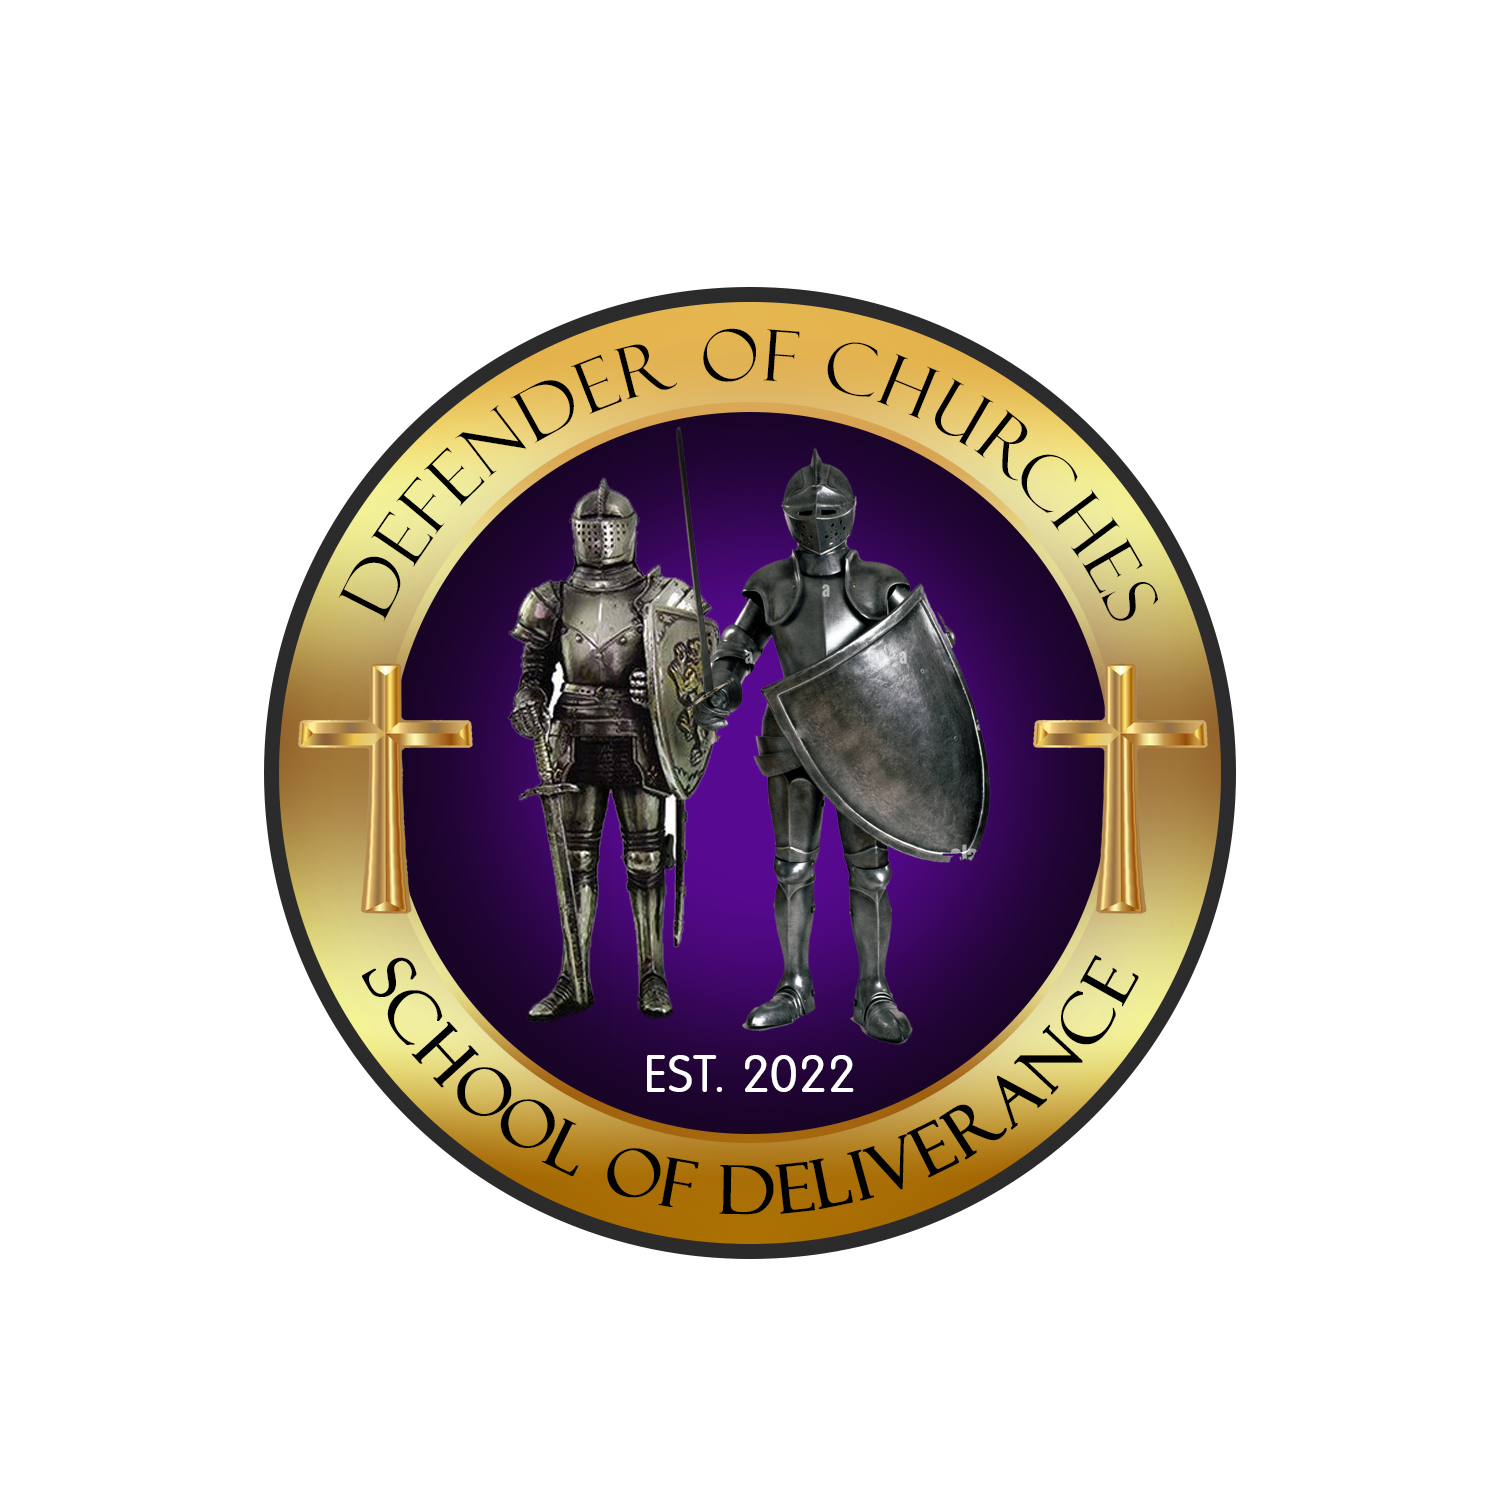 Defender of Churches School of Deliverance